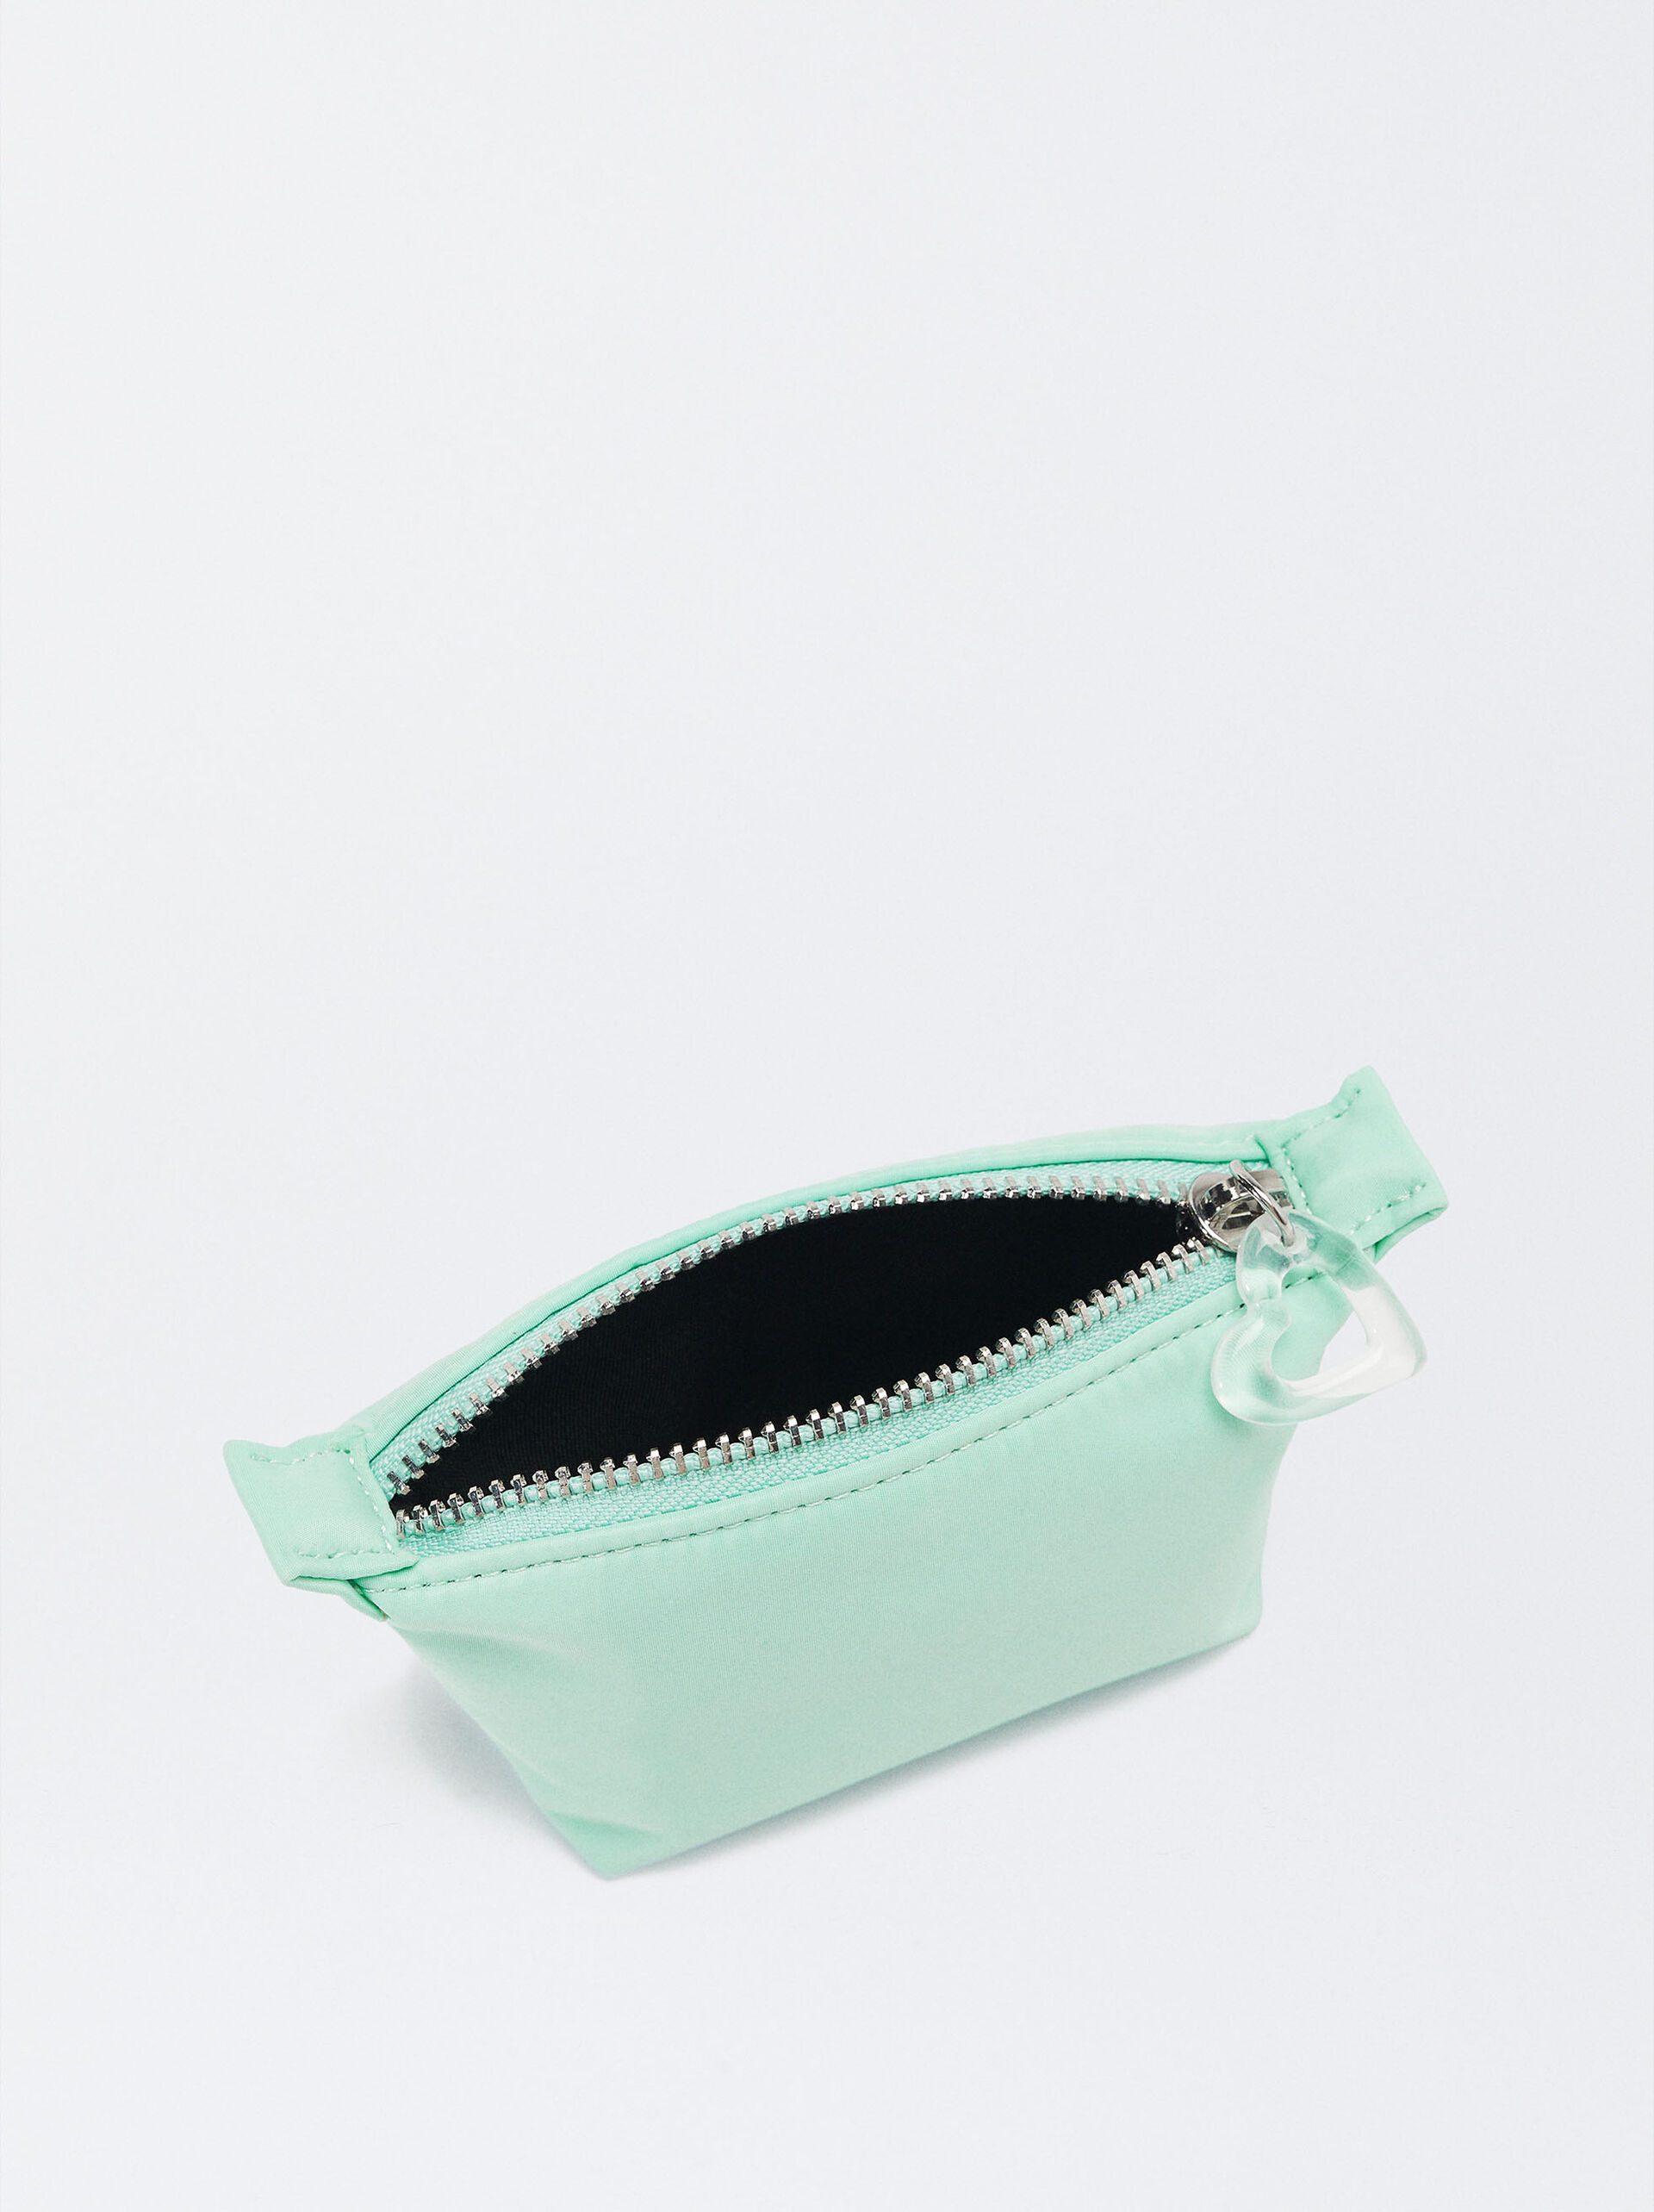 Nylon Coin Purse image number 3.0